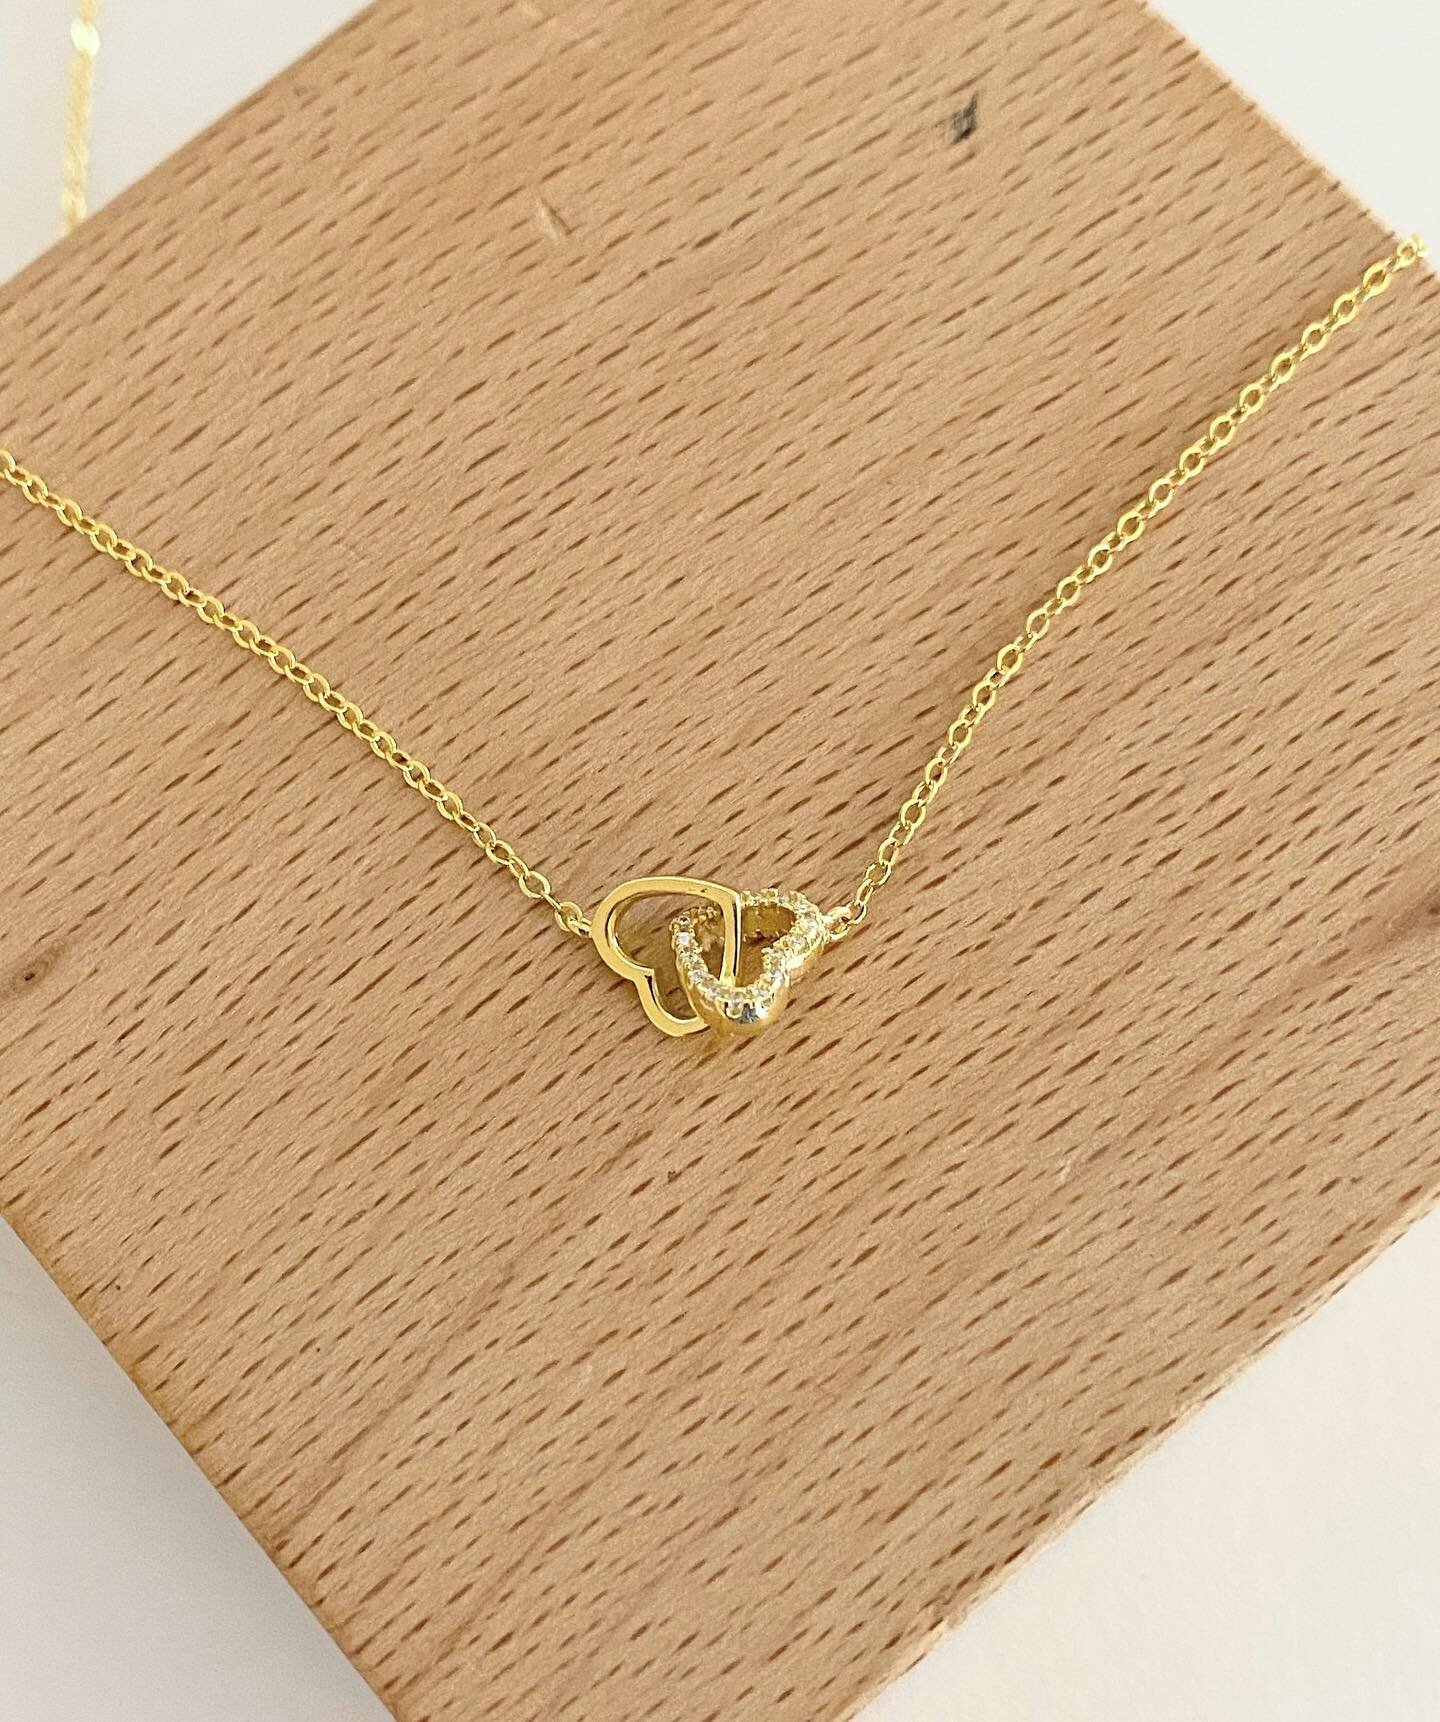 New gold heart chain, shop new arrivals, ❤️❤️❤️❤️